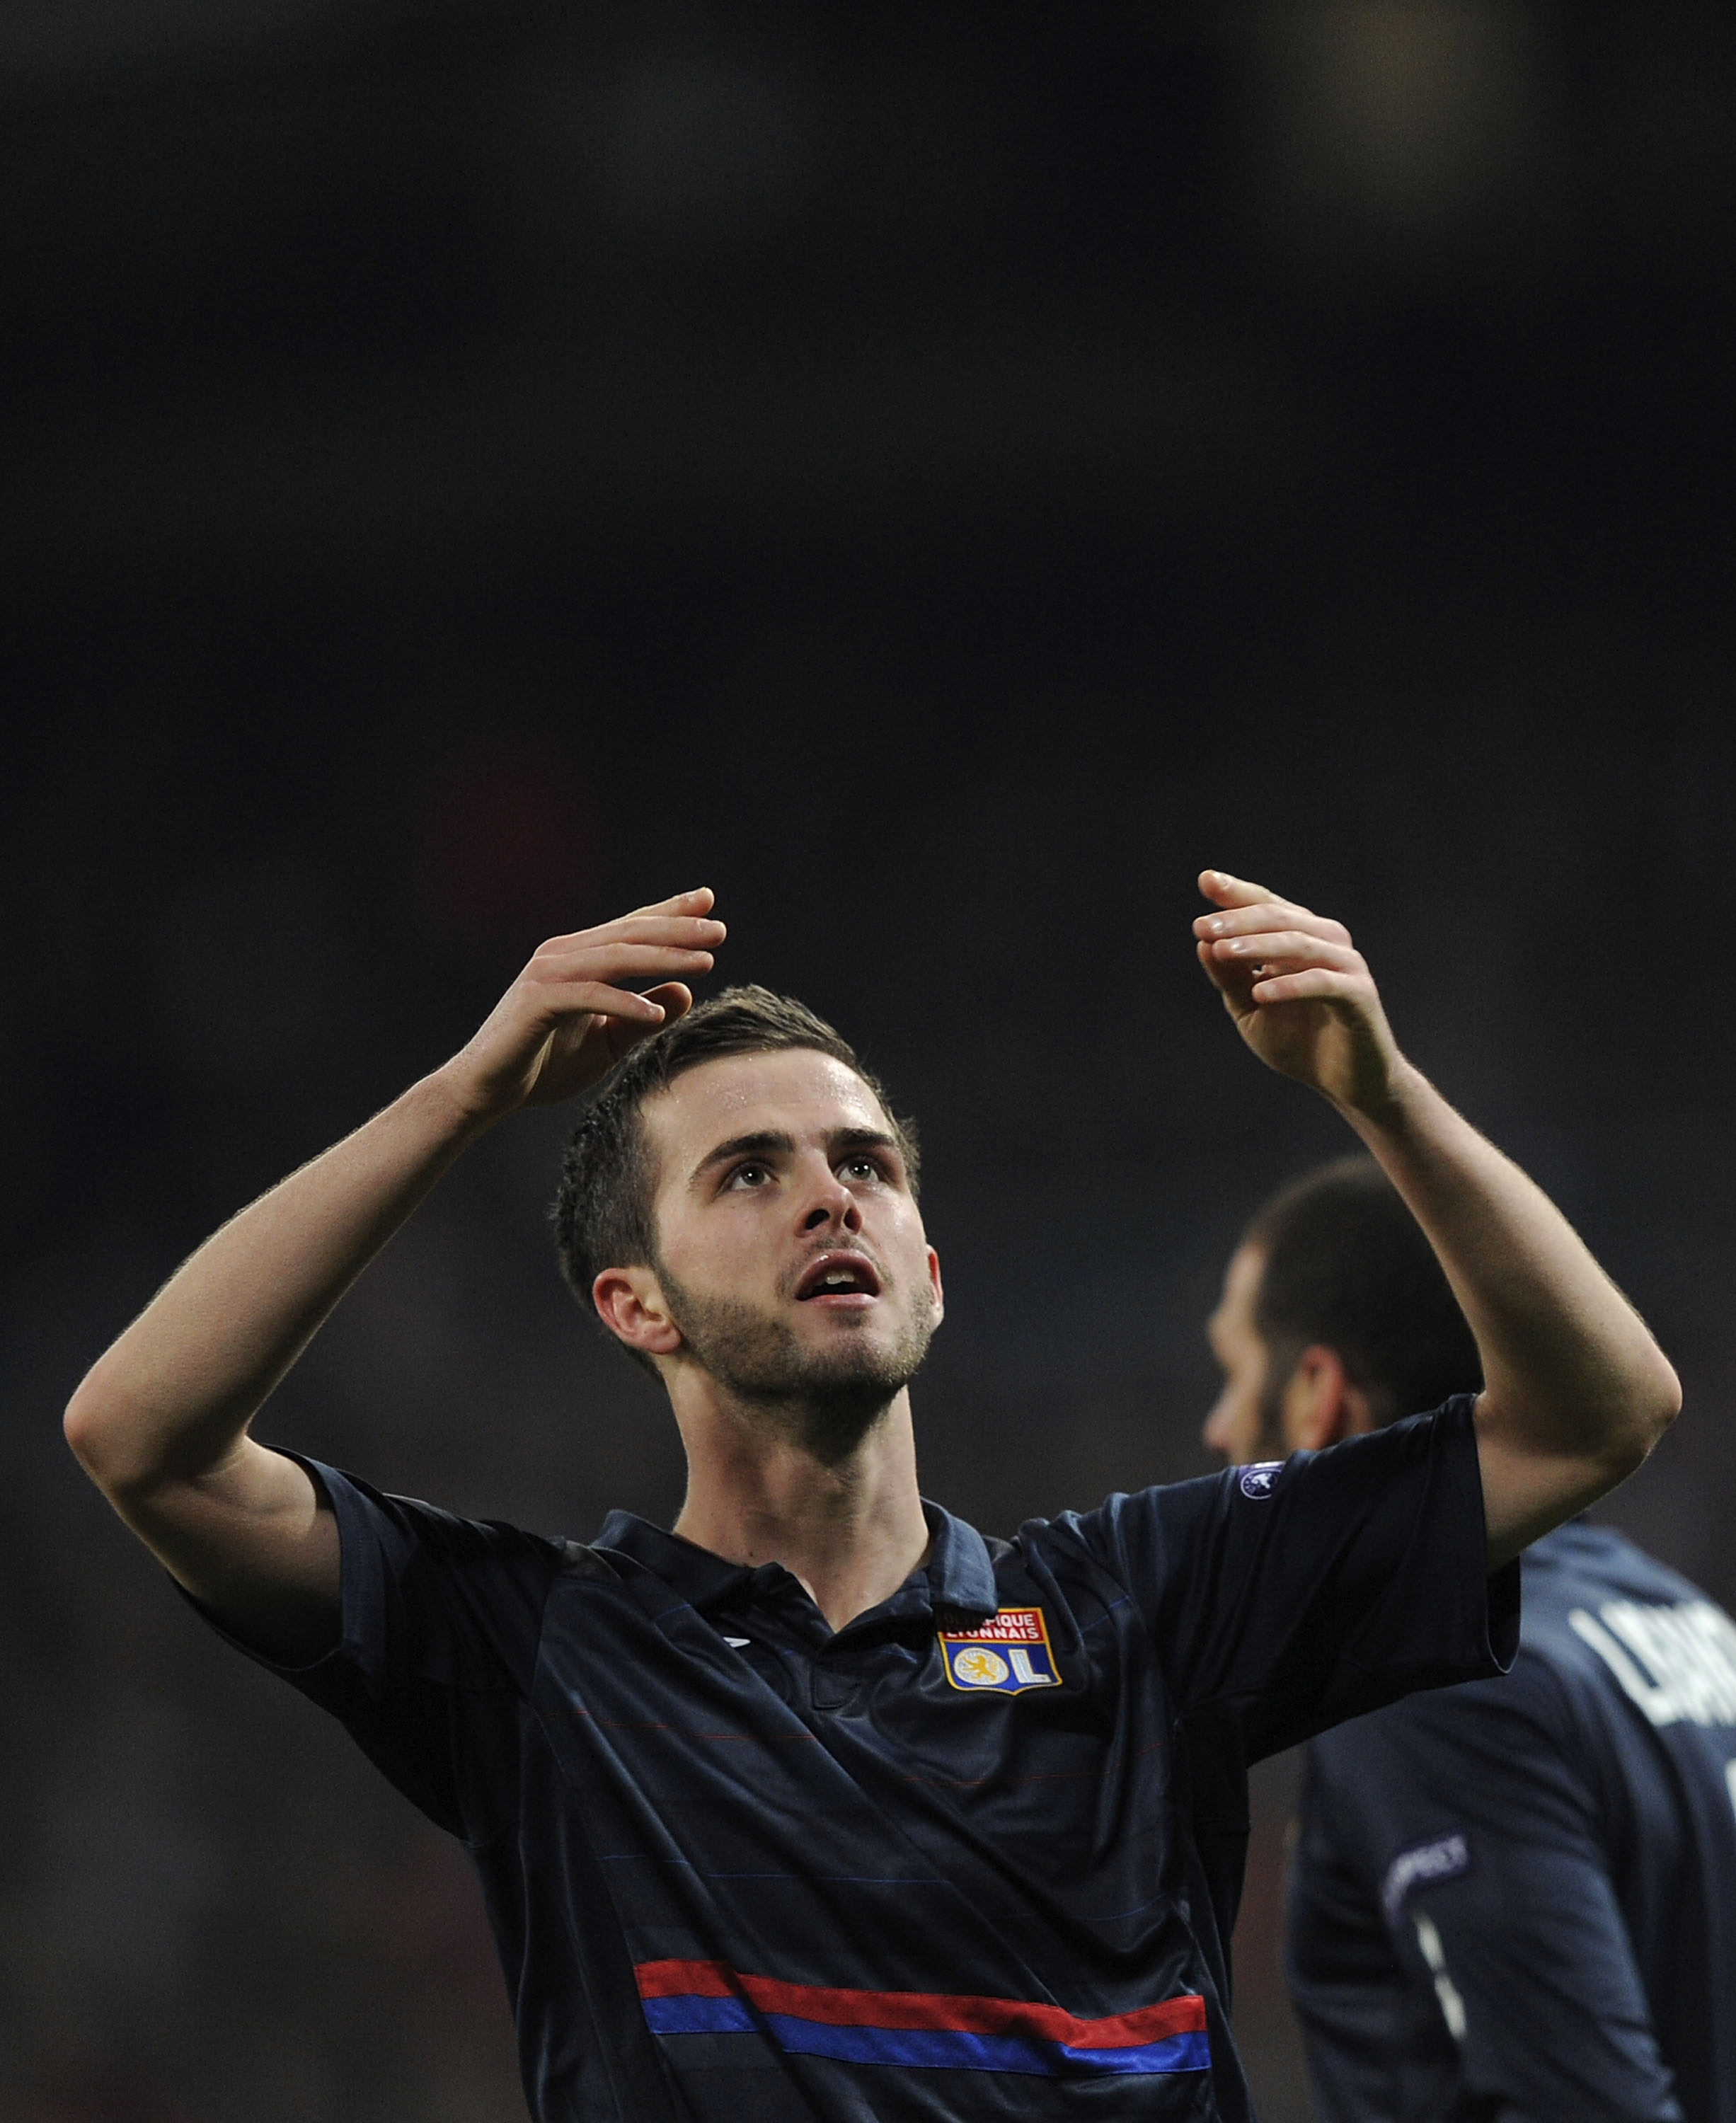 MADRID, SPAIN - MARCH 10:  Miralem Pjanic of Olympique Lyon celebrates after scoring Lyonnais' first goal during the UEFA Champions League round of 16 2nd leg match between Real Madrid and Olympique Lyonnais at Estadio Santiago Bernabeu on March 10, 2010